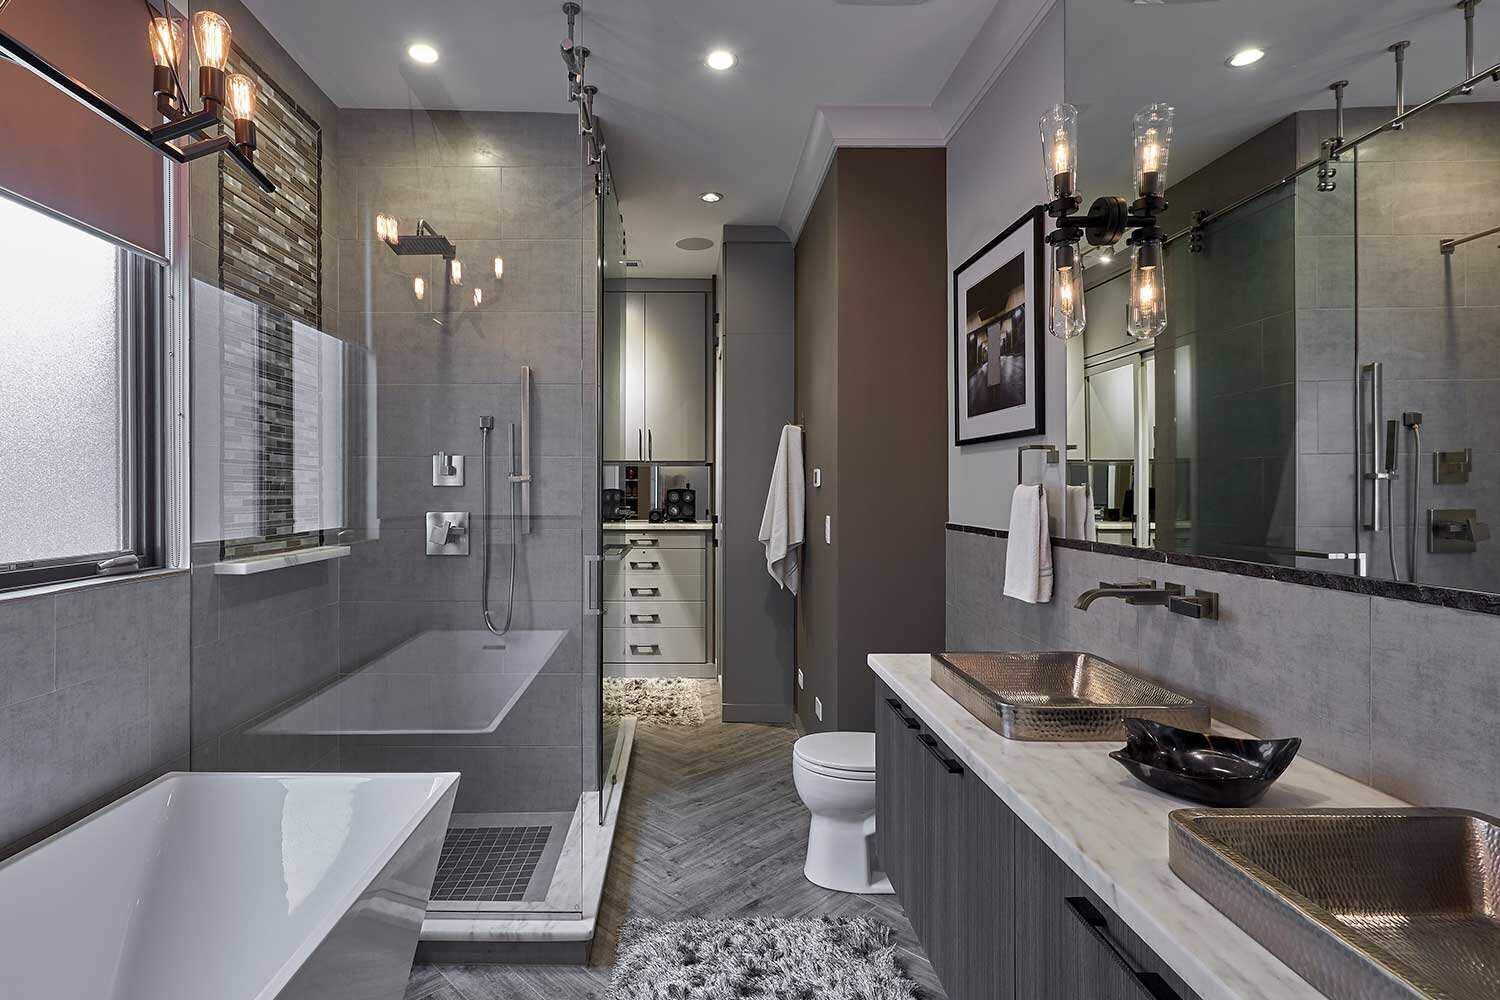 From Dull to Dazzling: How Bathroom Renovations Can Add Value to Your Home